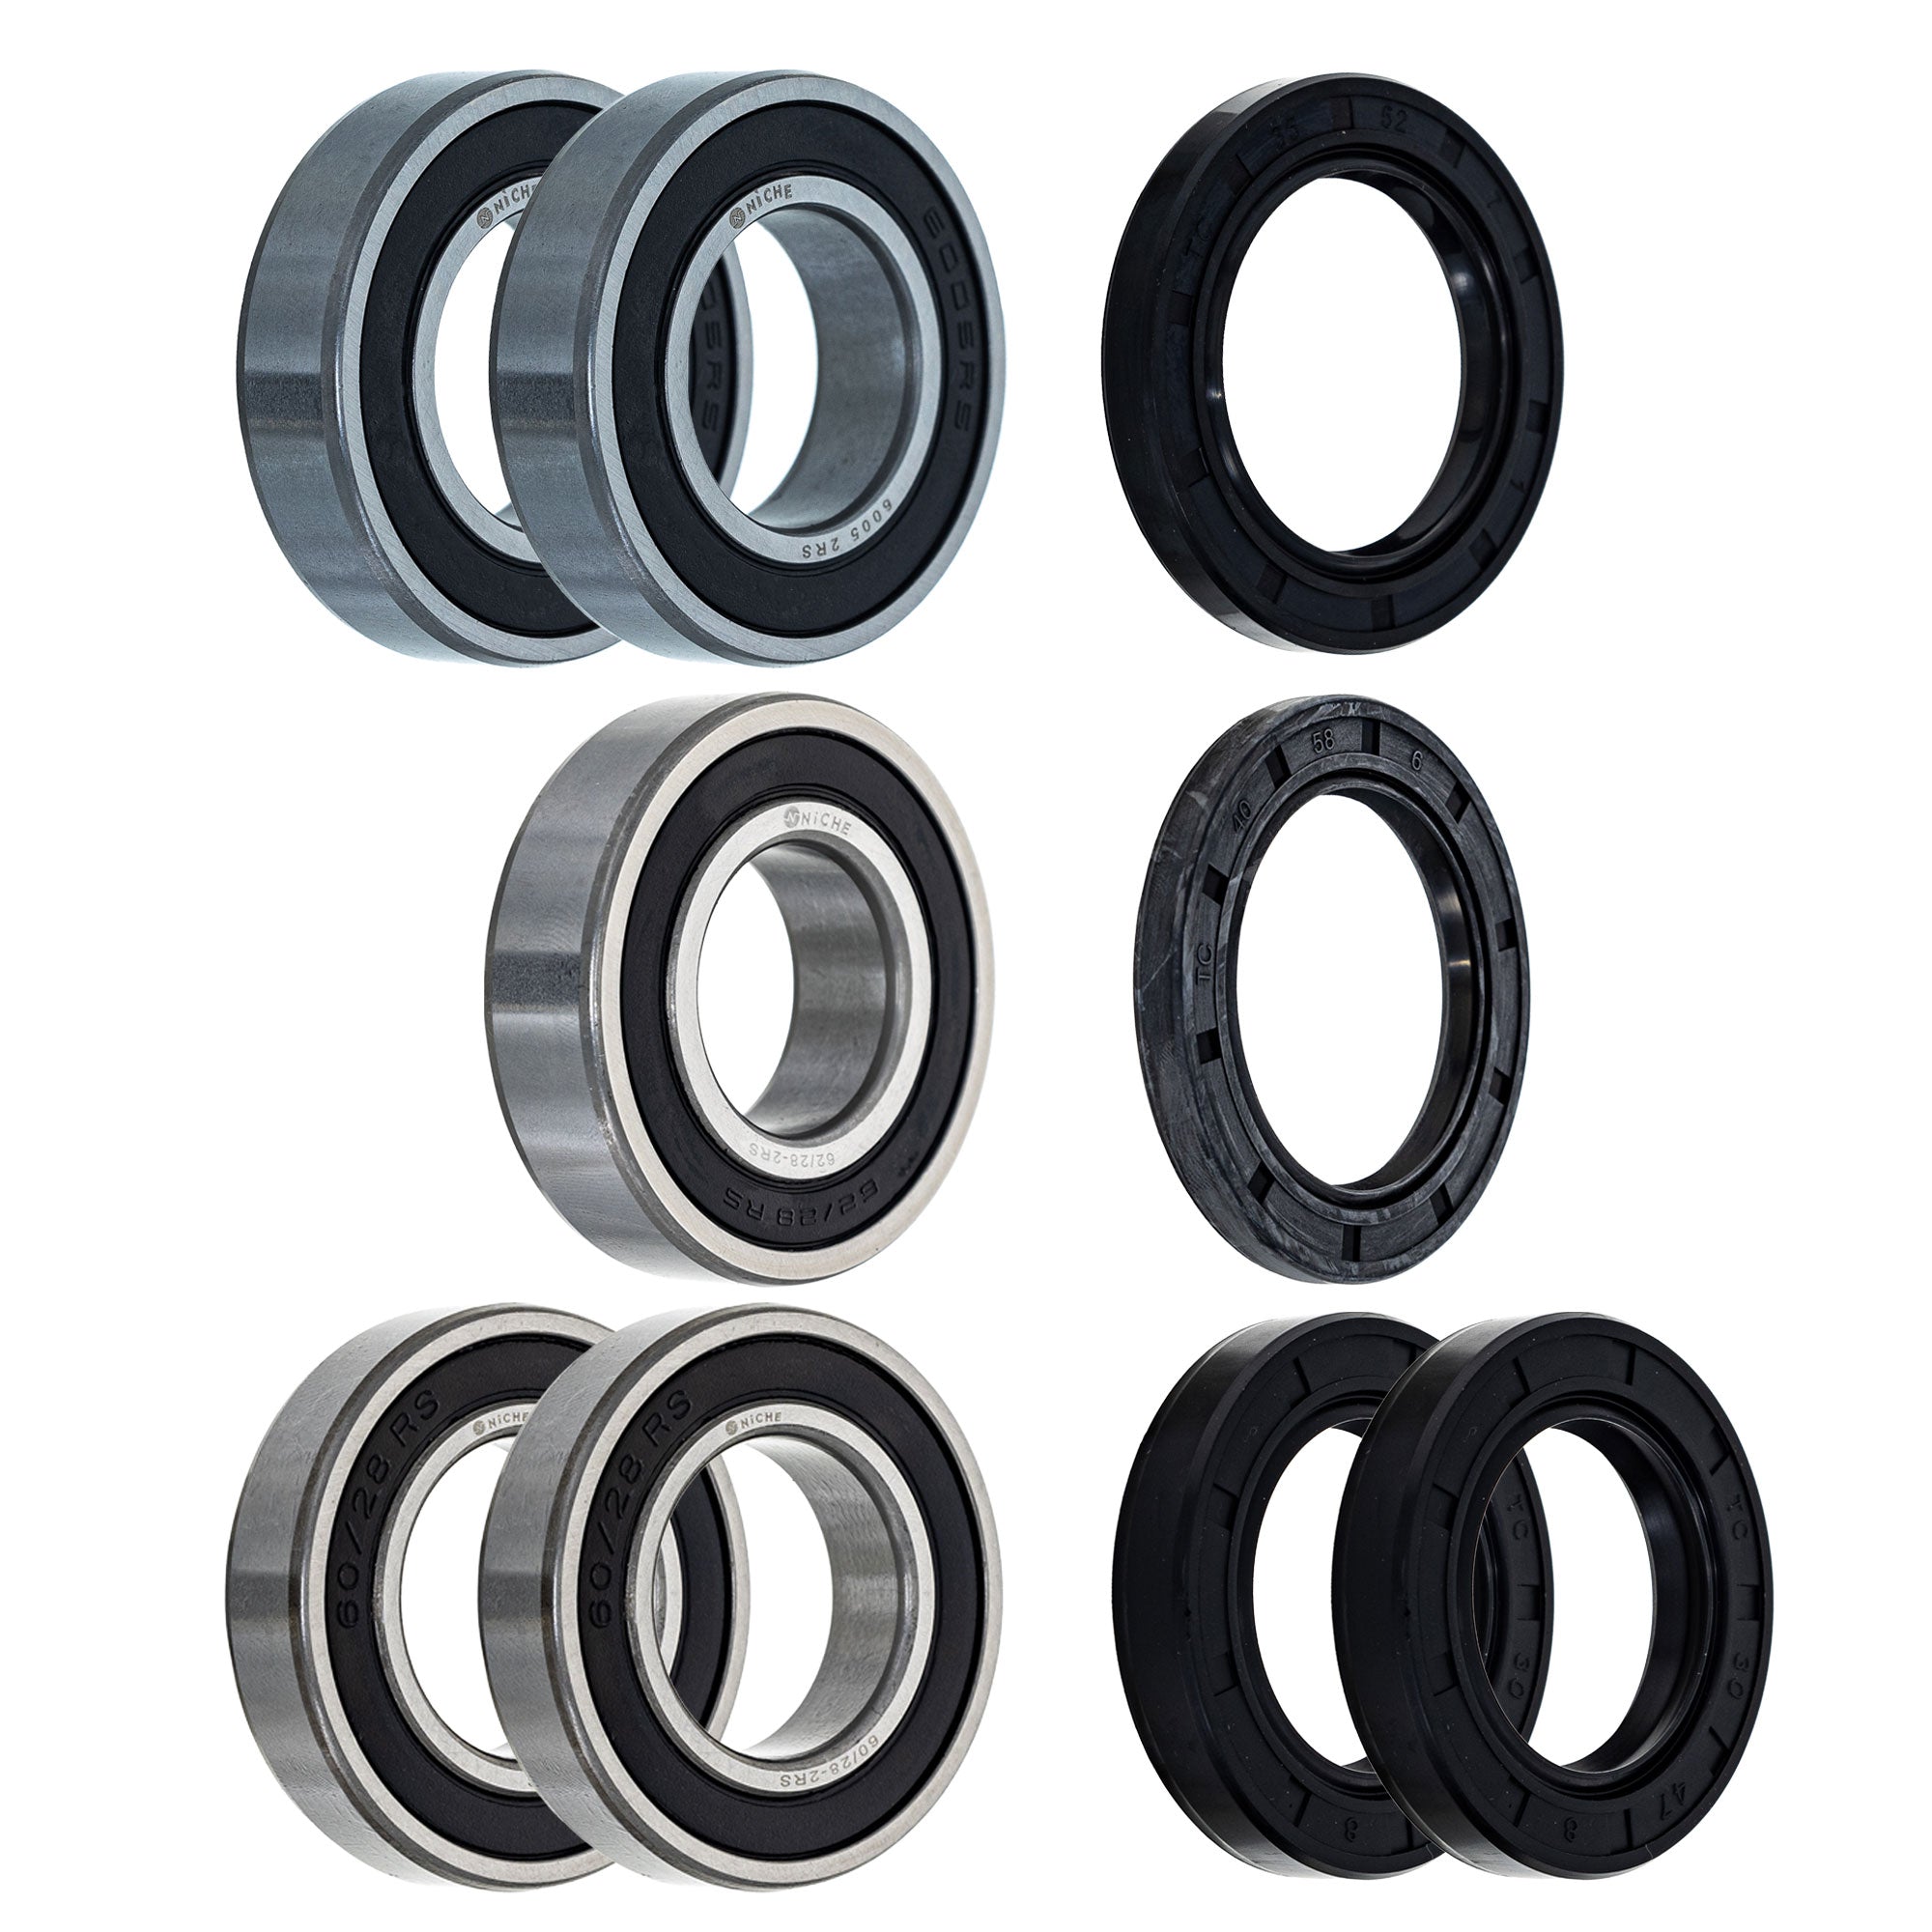 Wheel Bearing Seal Kit for zOTHER S1000XR NICHE MK1008467